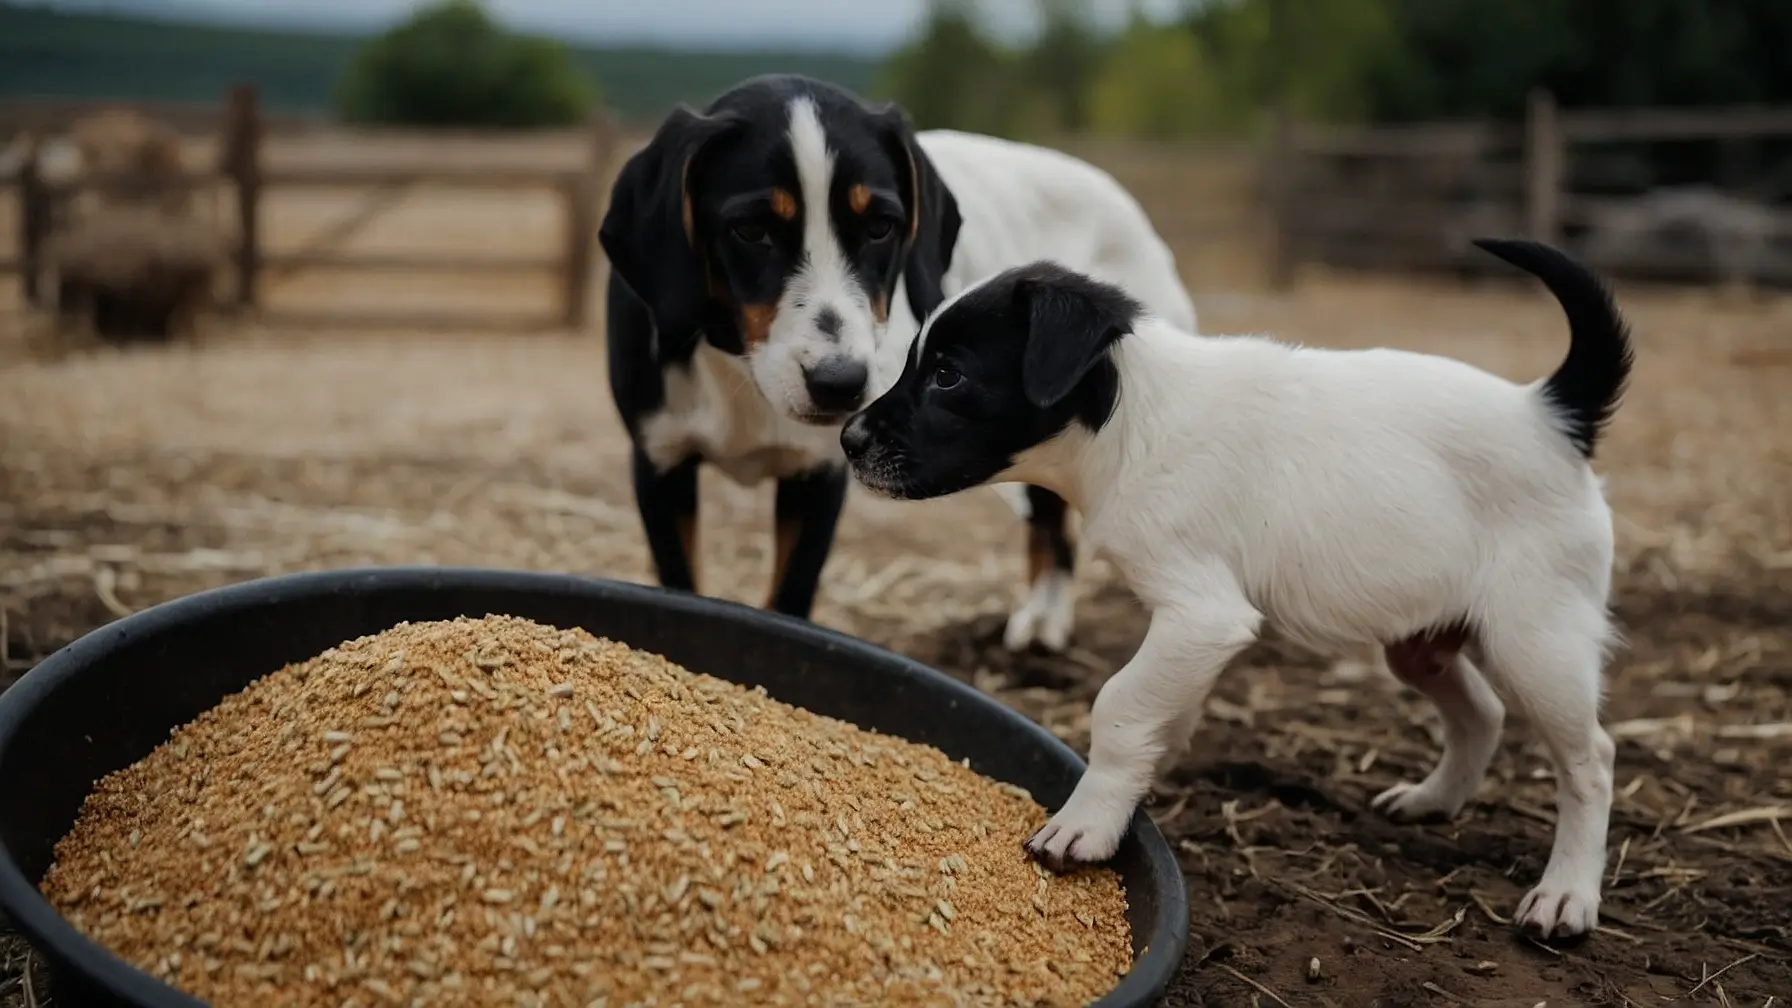 Can dogs eat goat feed?